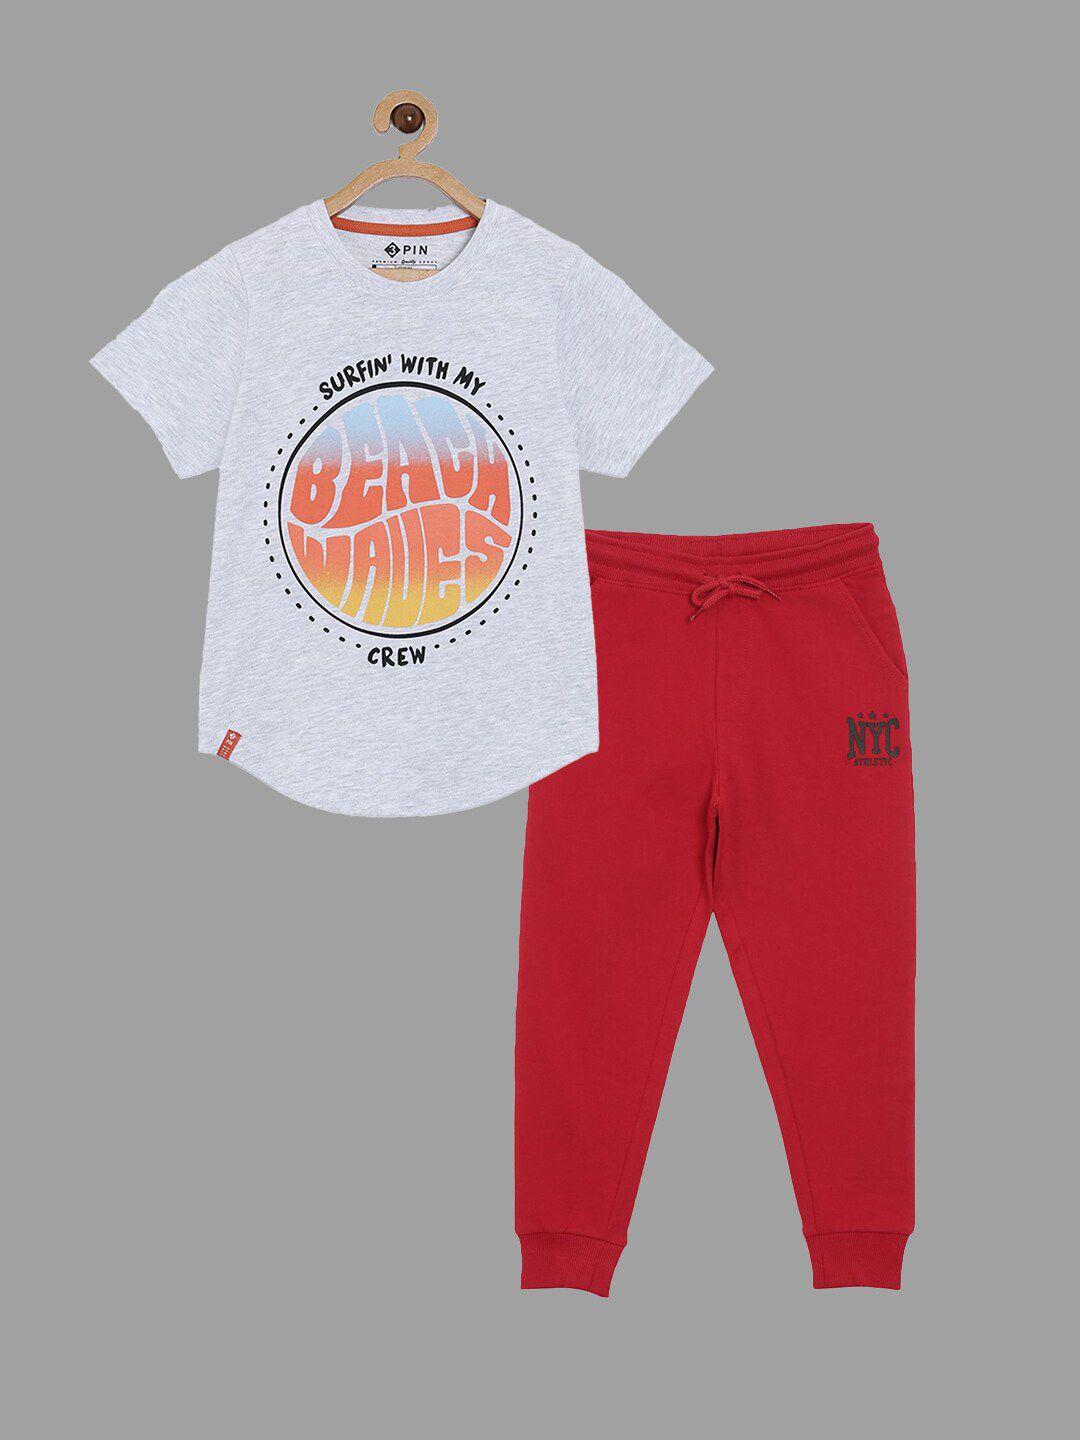 3pin boys white & red printed 2 piece cotton t-shirt jogger clothing set